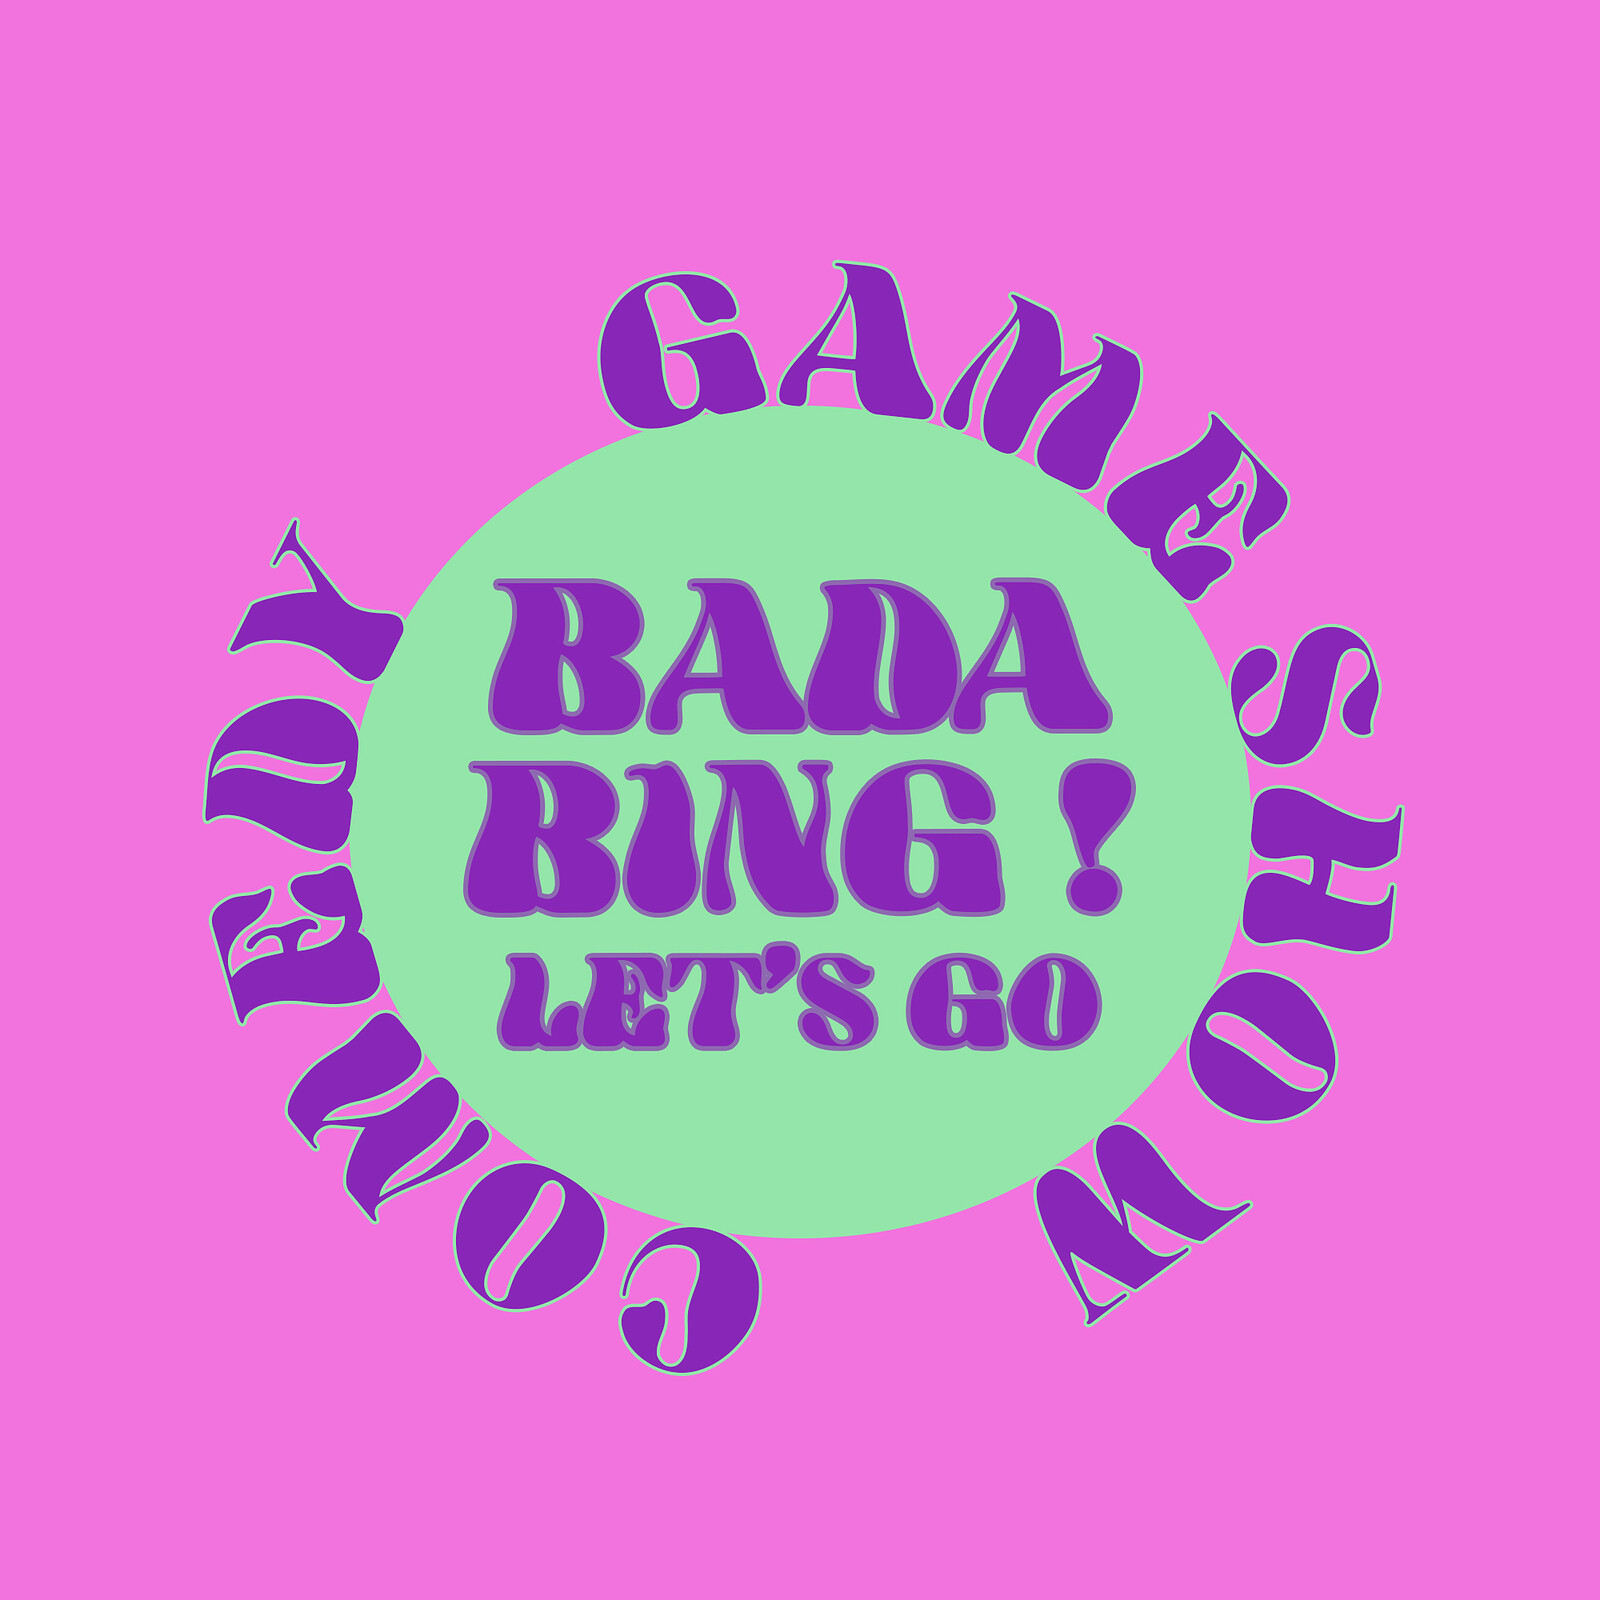 Bada Bing Let's Go, Comedy Game Show at Exchange